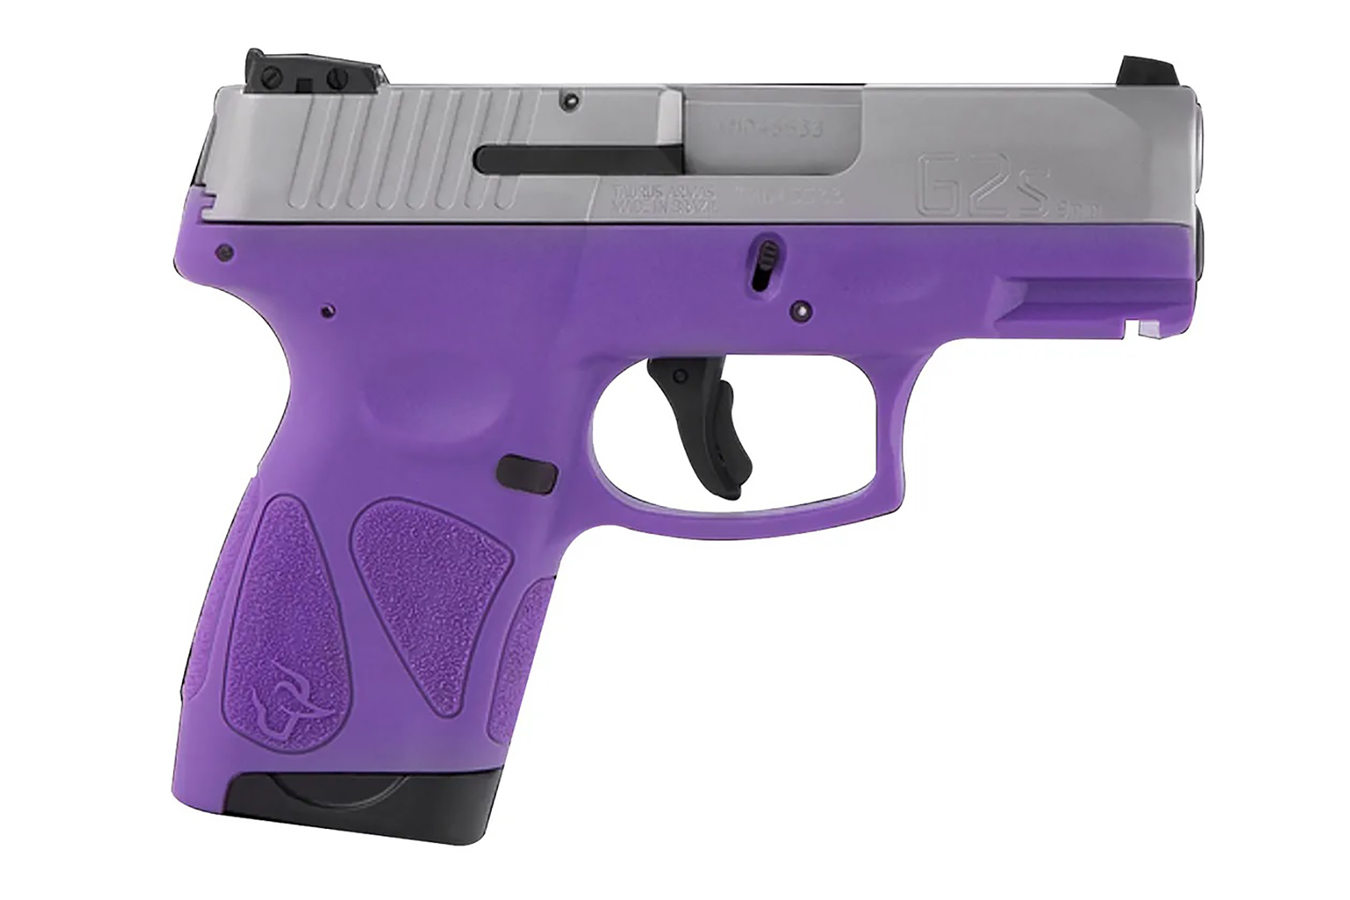 No. 15 Best Selling: TAURUS G2S 9MM SEMI-AUTO PISTOL WITH DARK PURPLE FRAME AND SILVER SLIDE